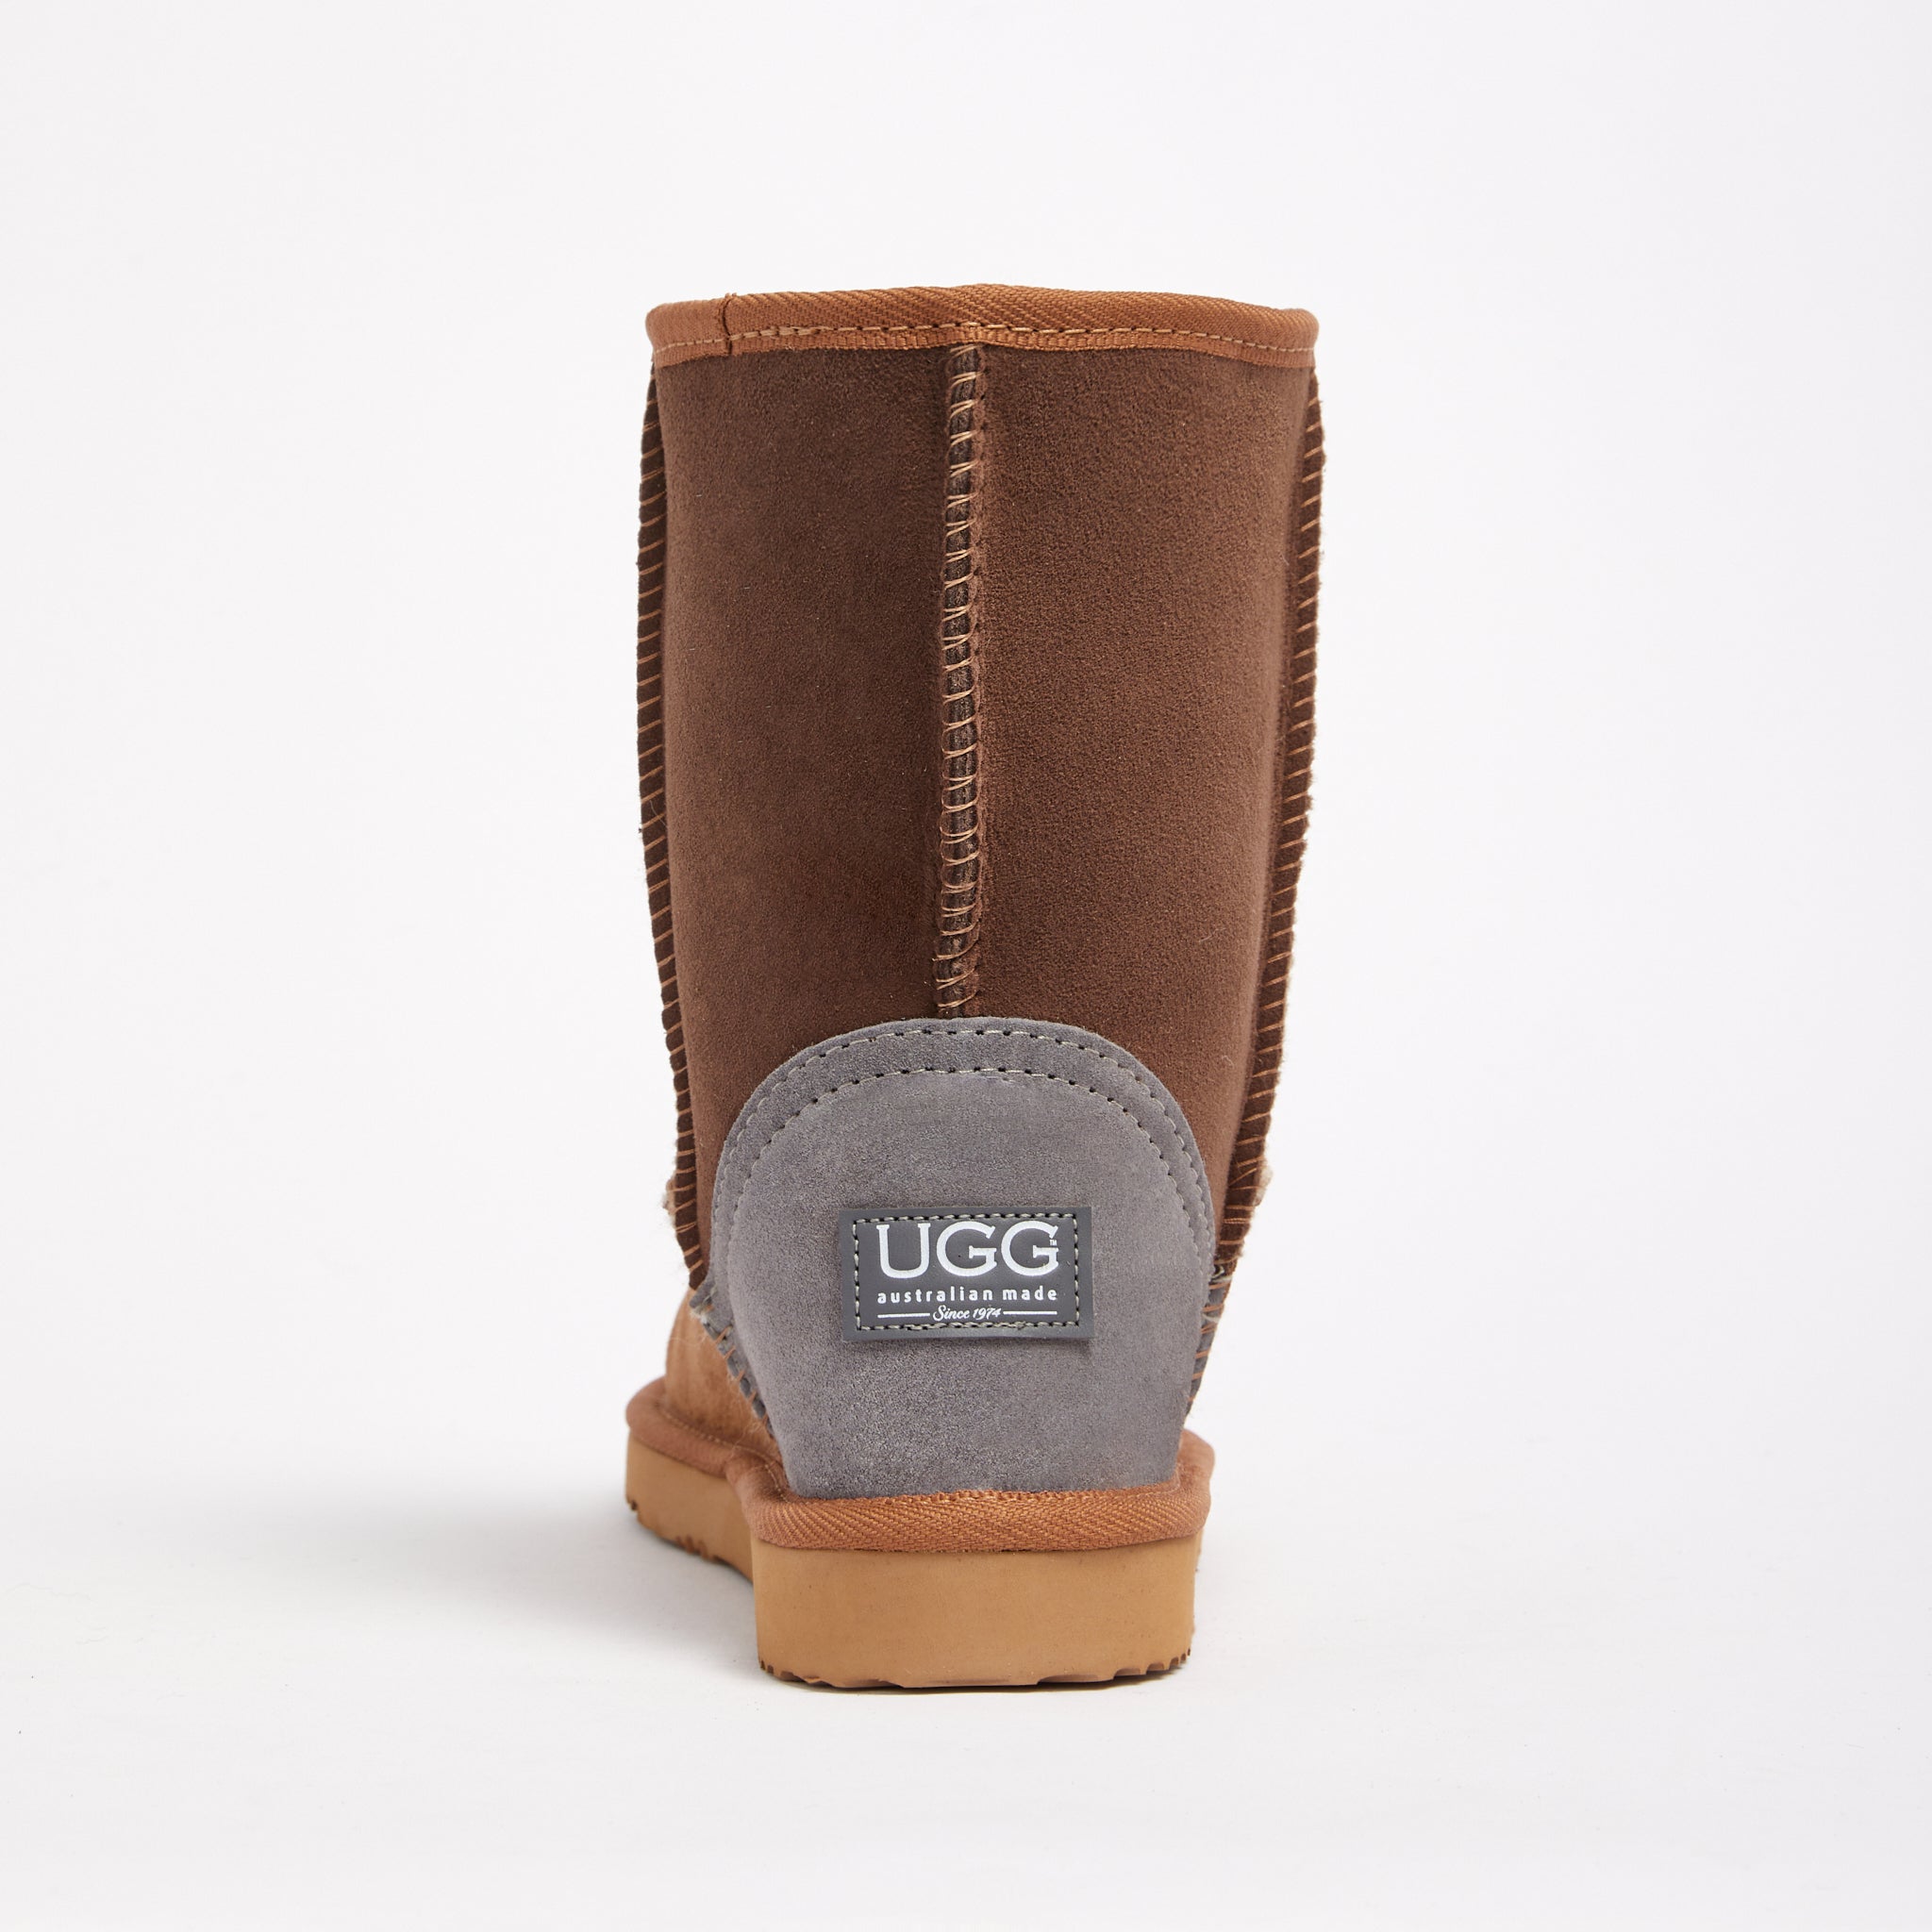 UGG Vs. UGG Since 1974: What's the Difference?